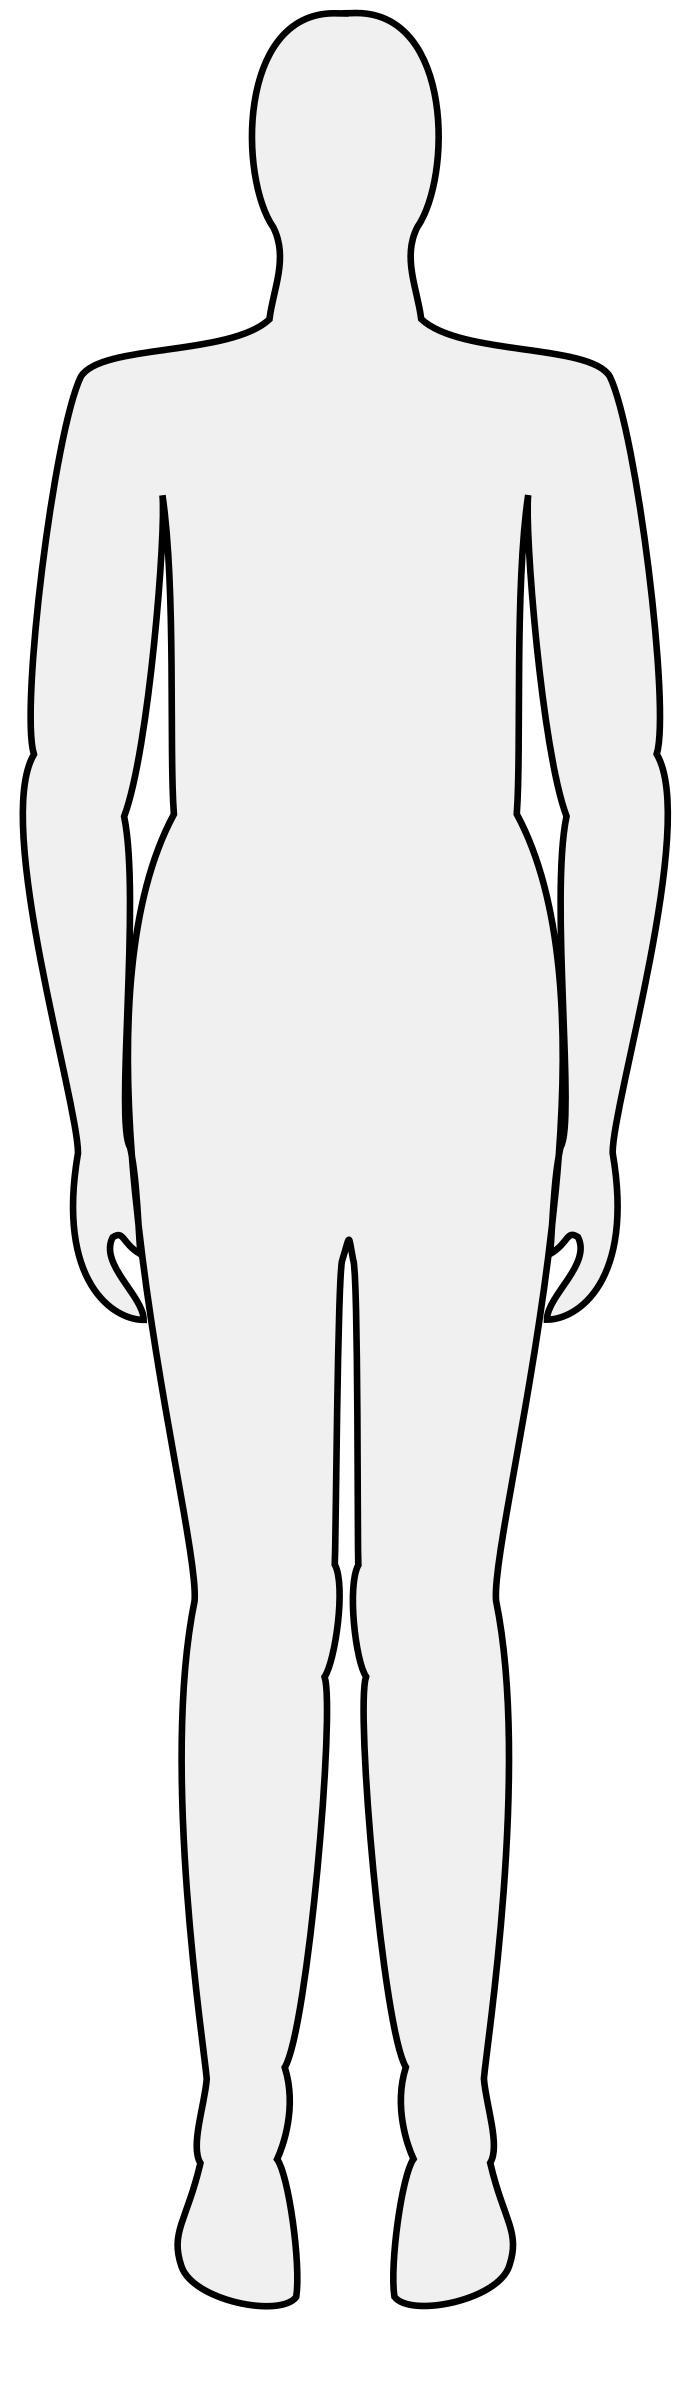 Male body silhouette png transparent